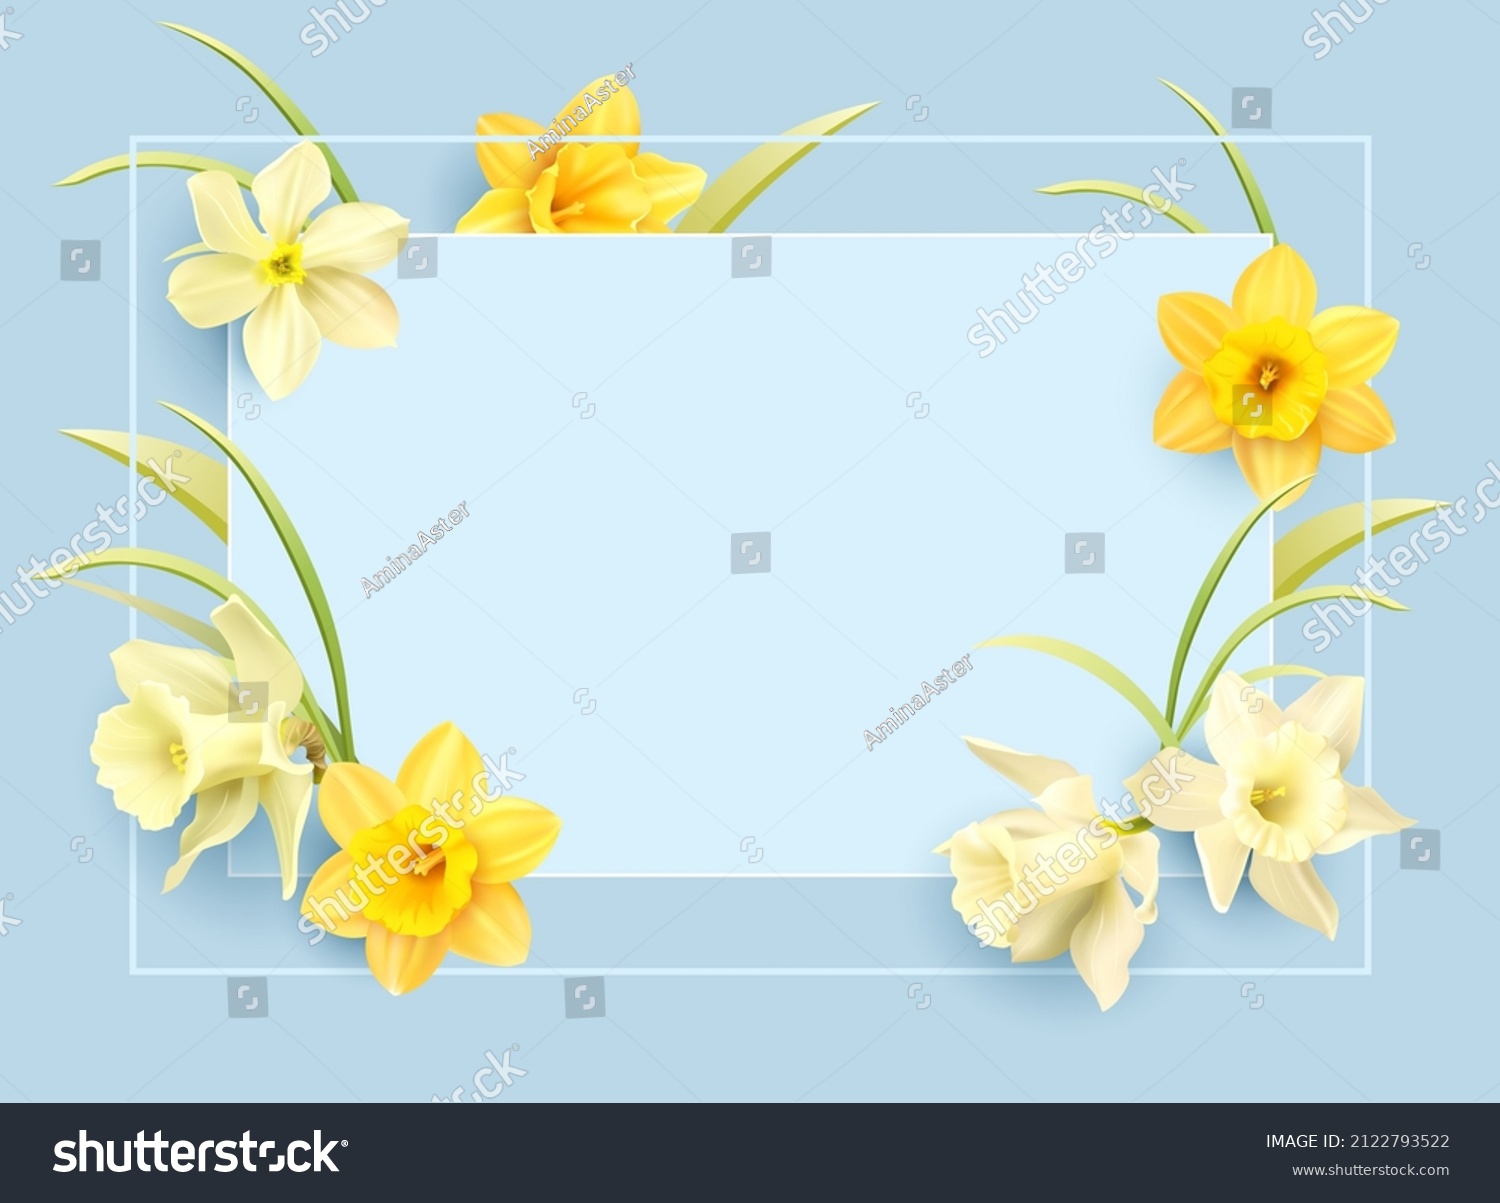 SVG of Romantic delicate background with floral border of daffodils. Template for greeting card, invitation. Vector illustration. svg